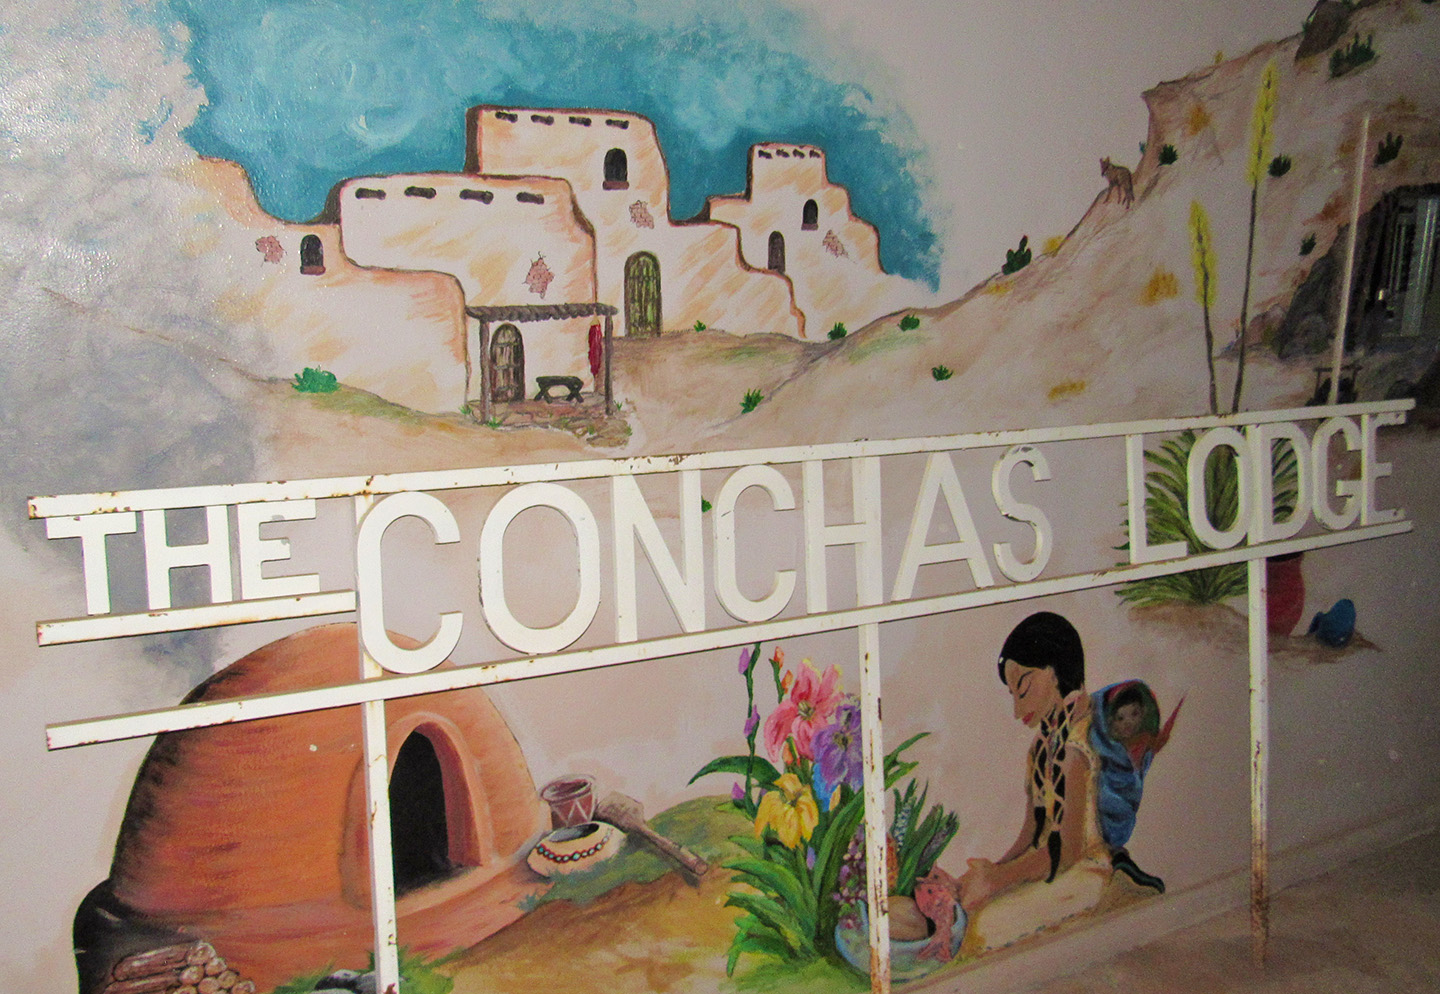 Image of a mural from inside the Conchas Lodge. 